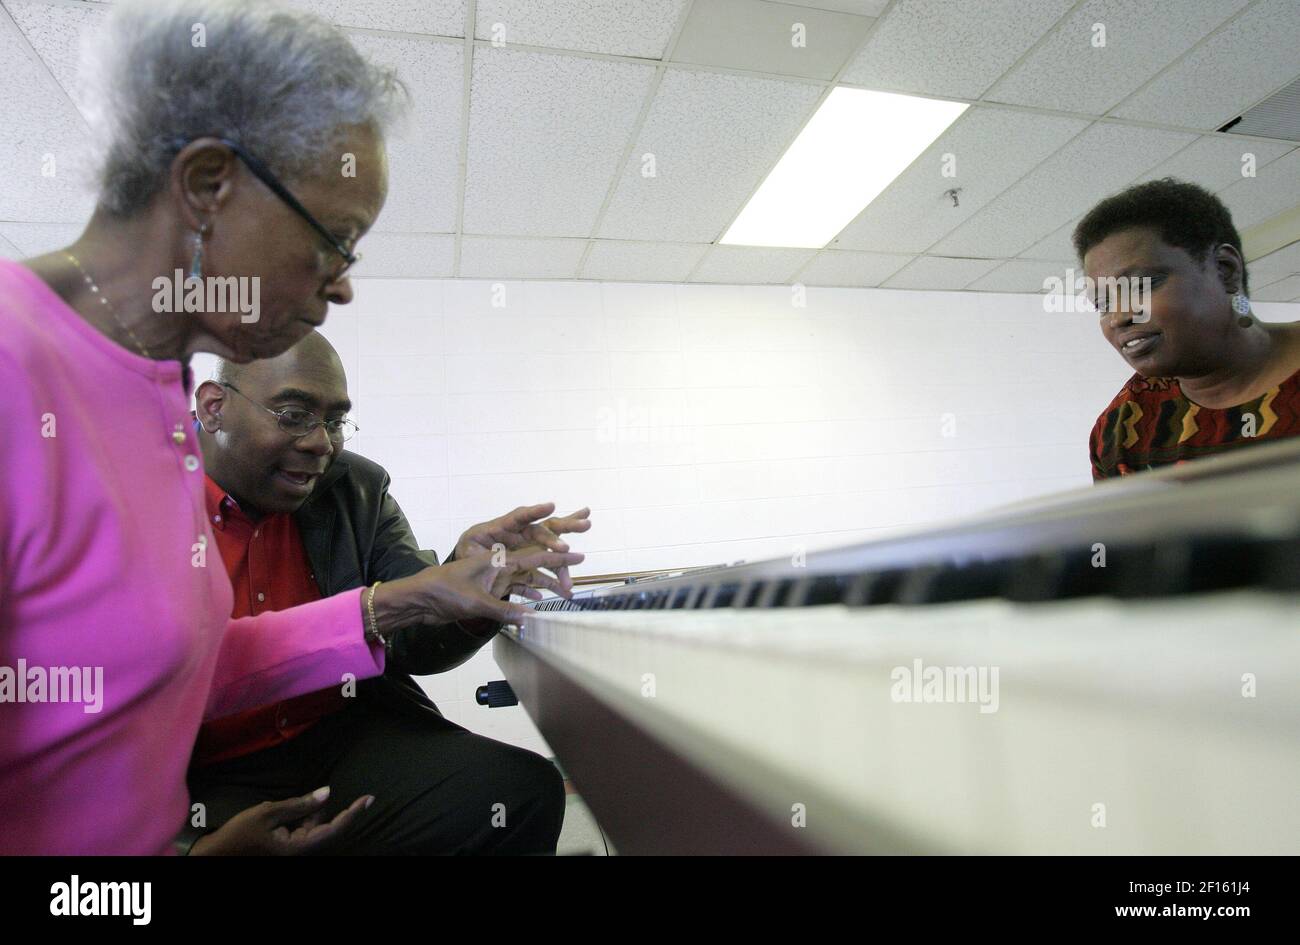 Zeophis Campbell, left, and Pat Collins, right, get a piano lesson from John Hopkins, at the Swope Ridge Geriatrics Center in Kansas City, Kansas, March 27, 2007. Hopkins retaught himself how to play the piano with just his left hand after he suffered a stroke. (Photo by Jim Barcus/Kansas City Star/MCT/Sipa USA) Stock Photo